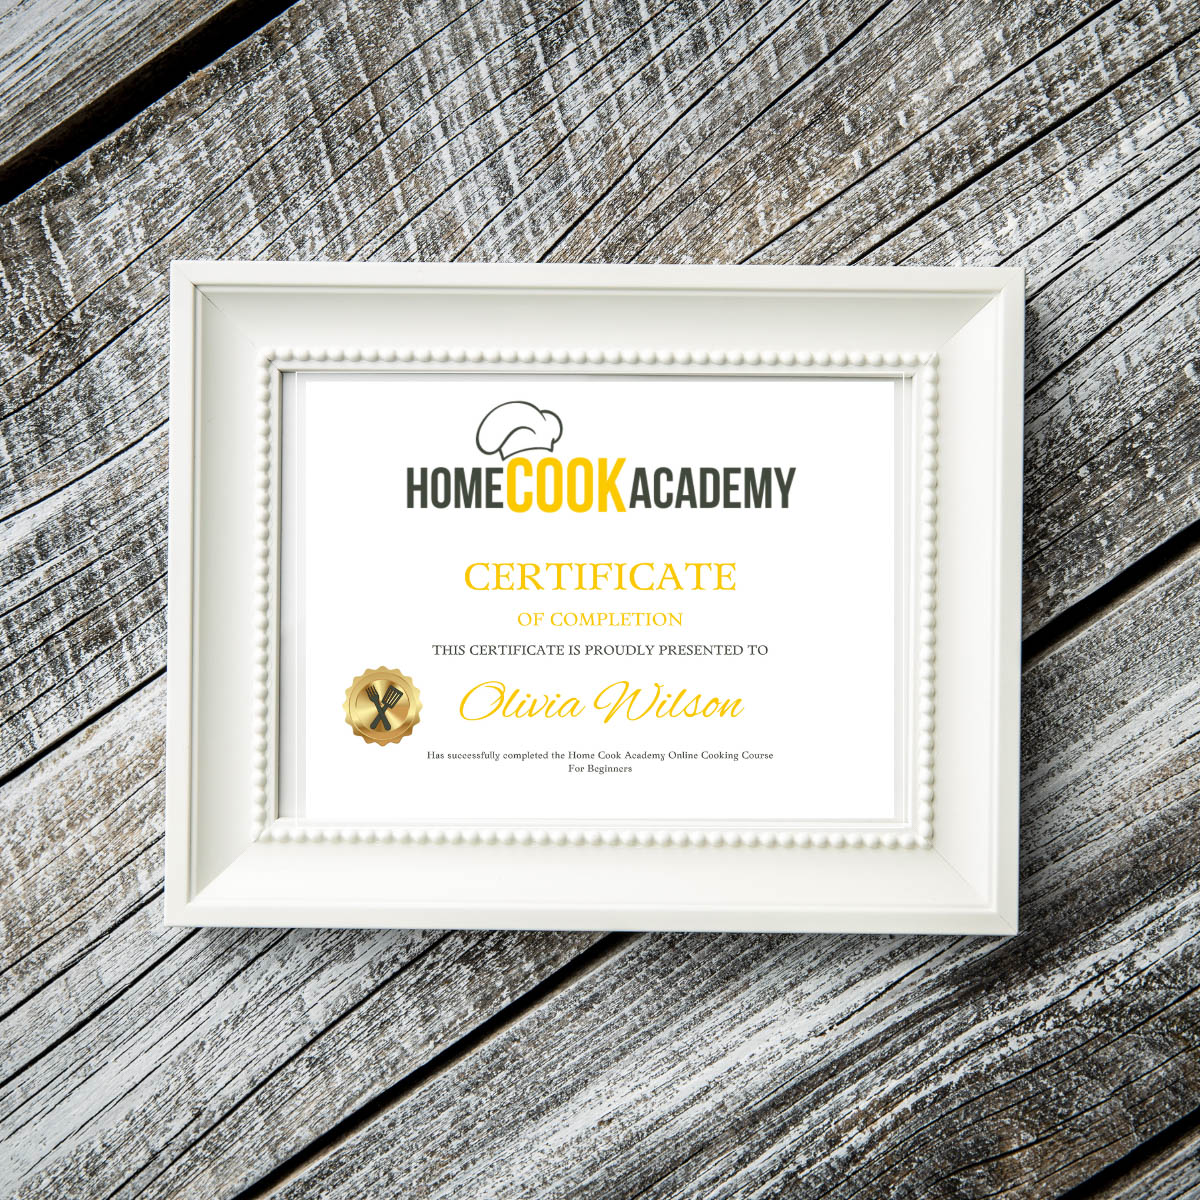 Online cooking course certificate in a frame on a wooden background